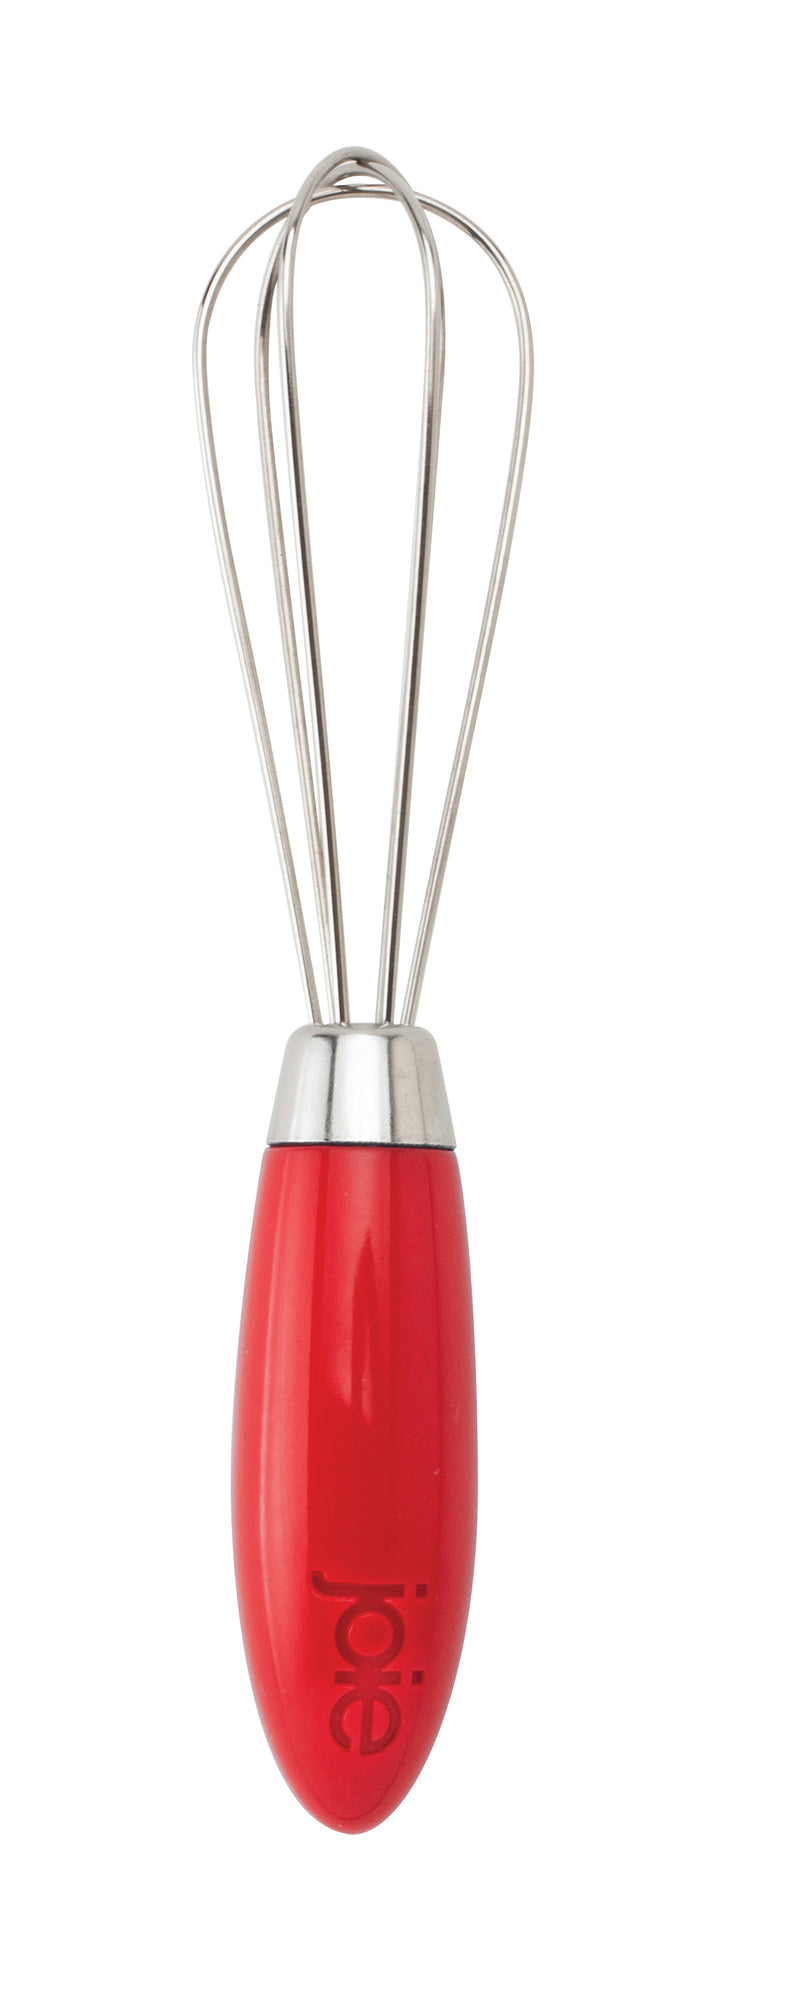 products/26674_MiniWhisk_Redcopy.jpg